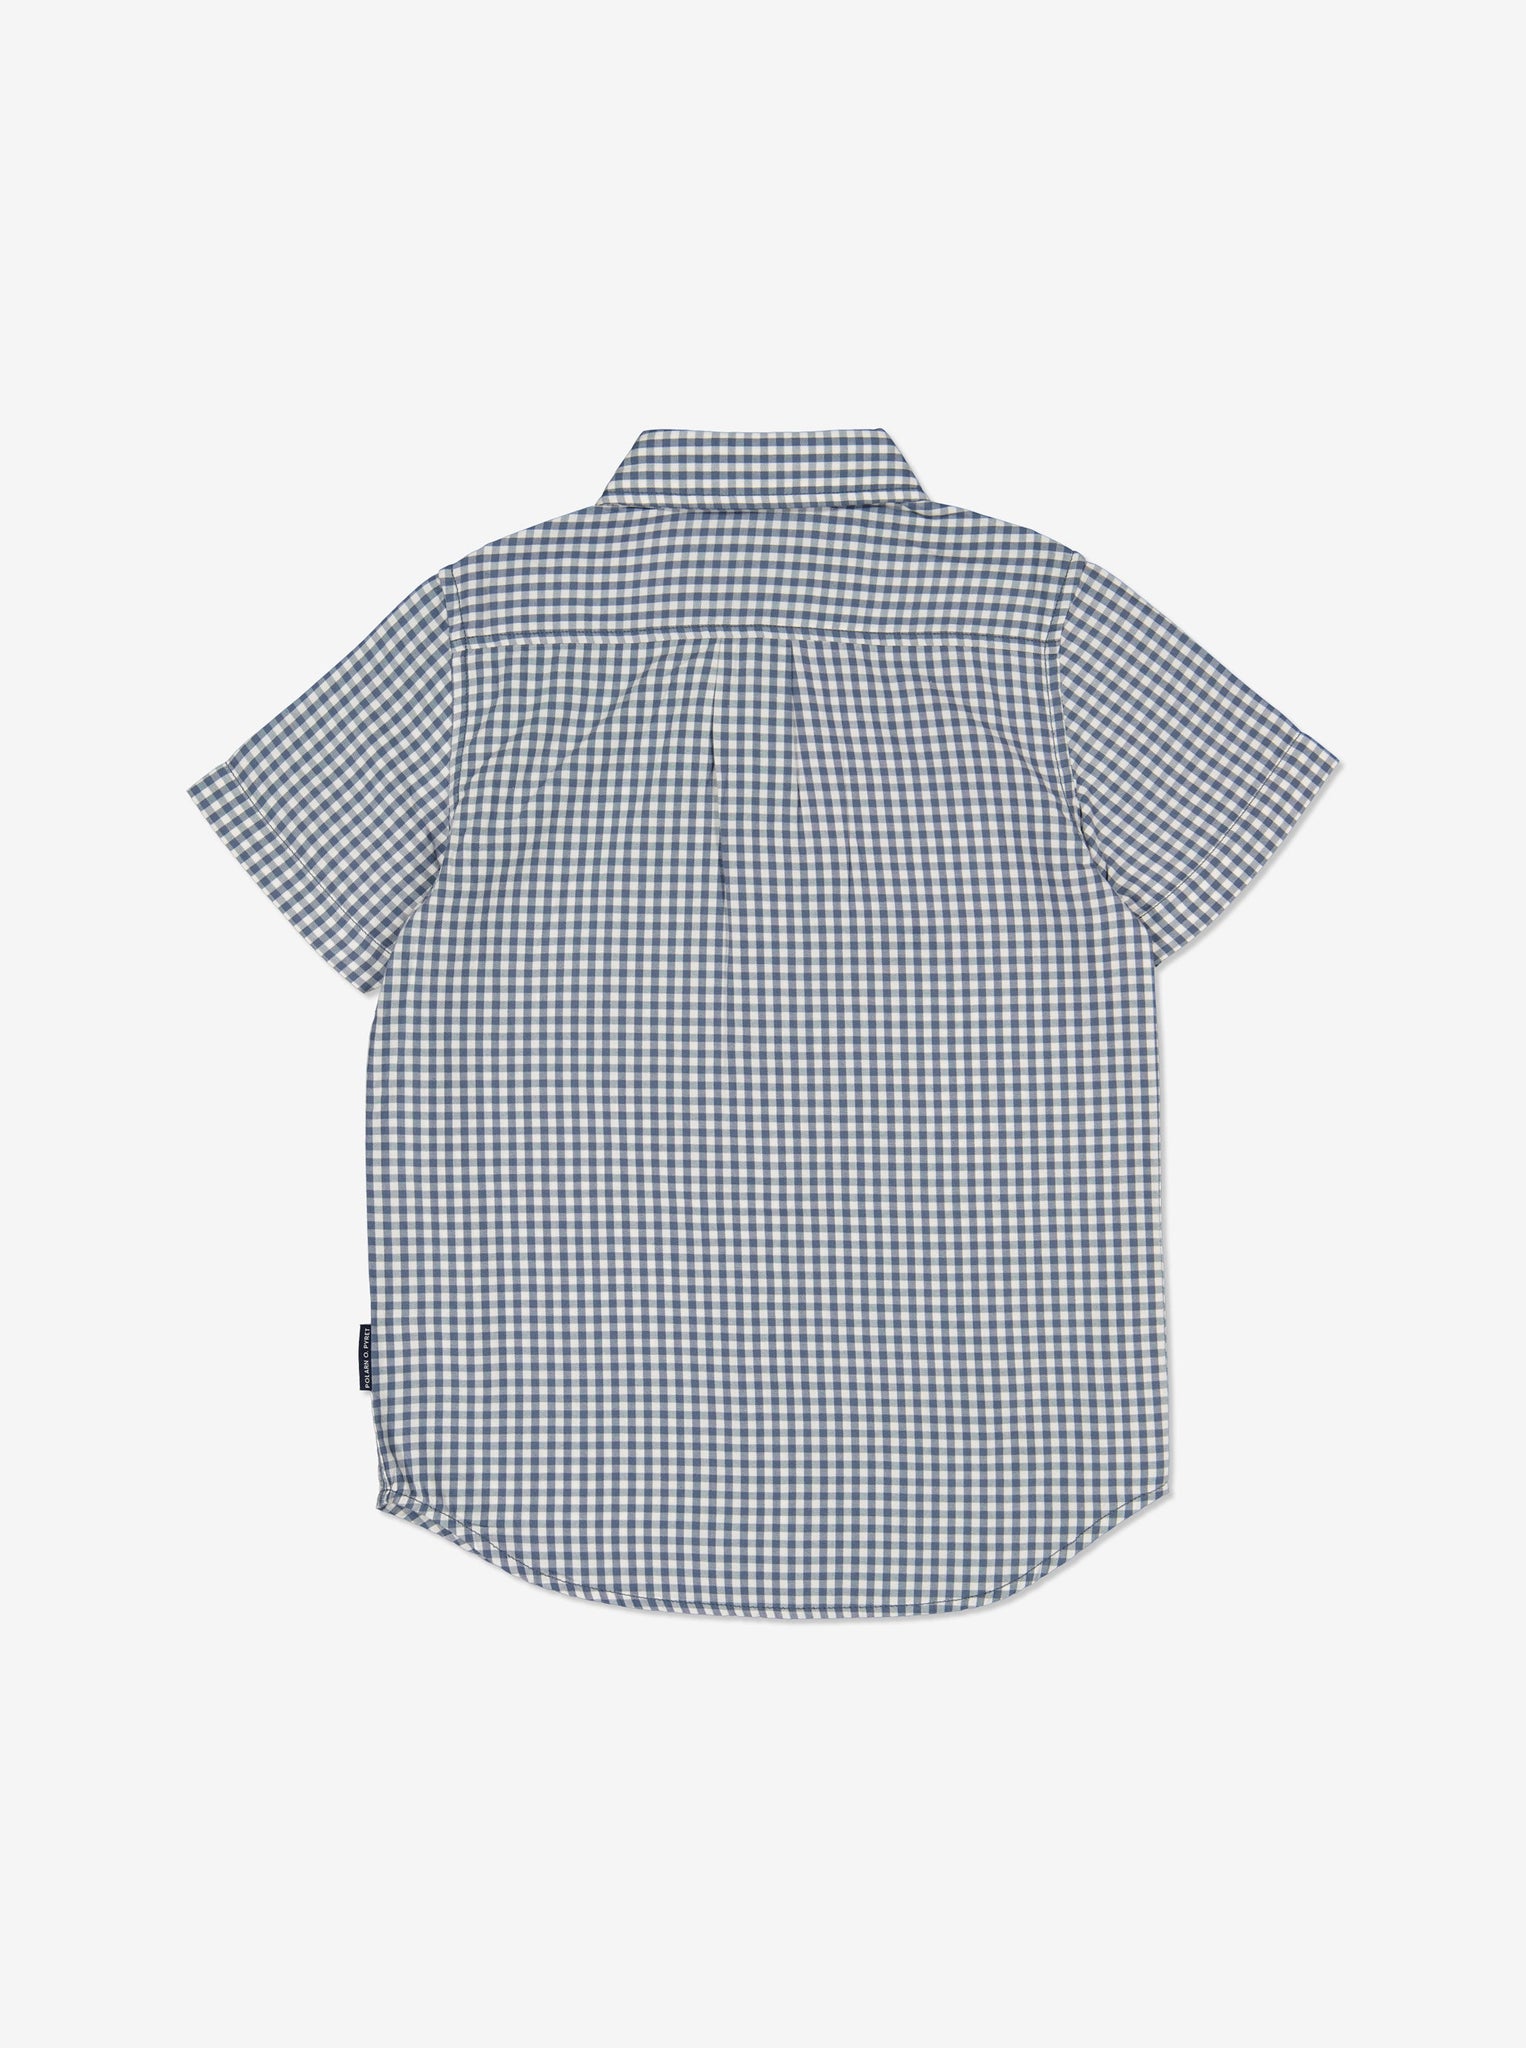 Blue Checked Boys Shirt from Polarn O. Pyret Kidswear. Made from 100% GOTS Organic Cotton.